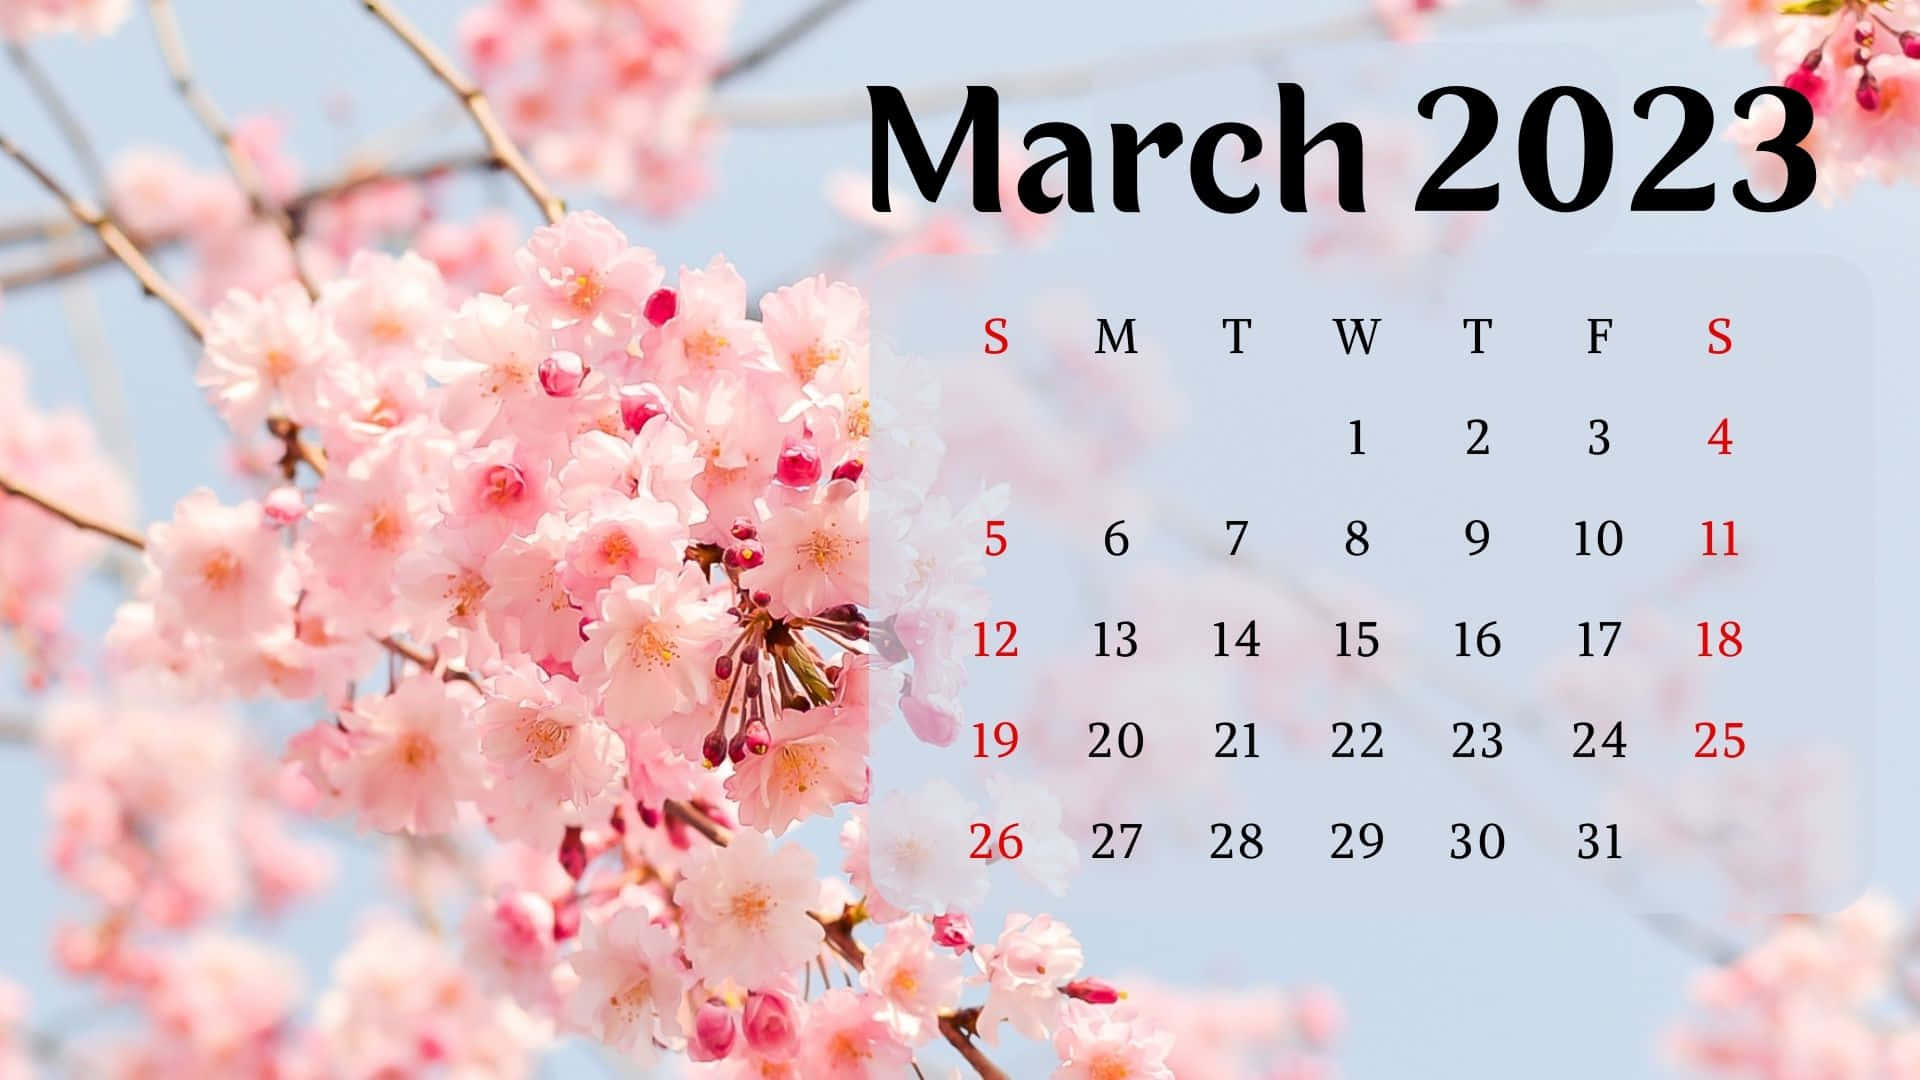 Have a snapshot of your upcoming plans in March 2023 with this colorful calendar. Wallpaper